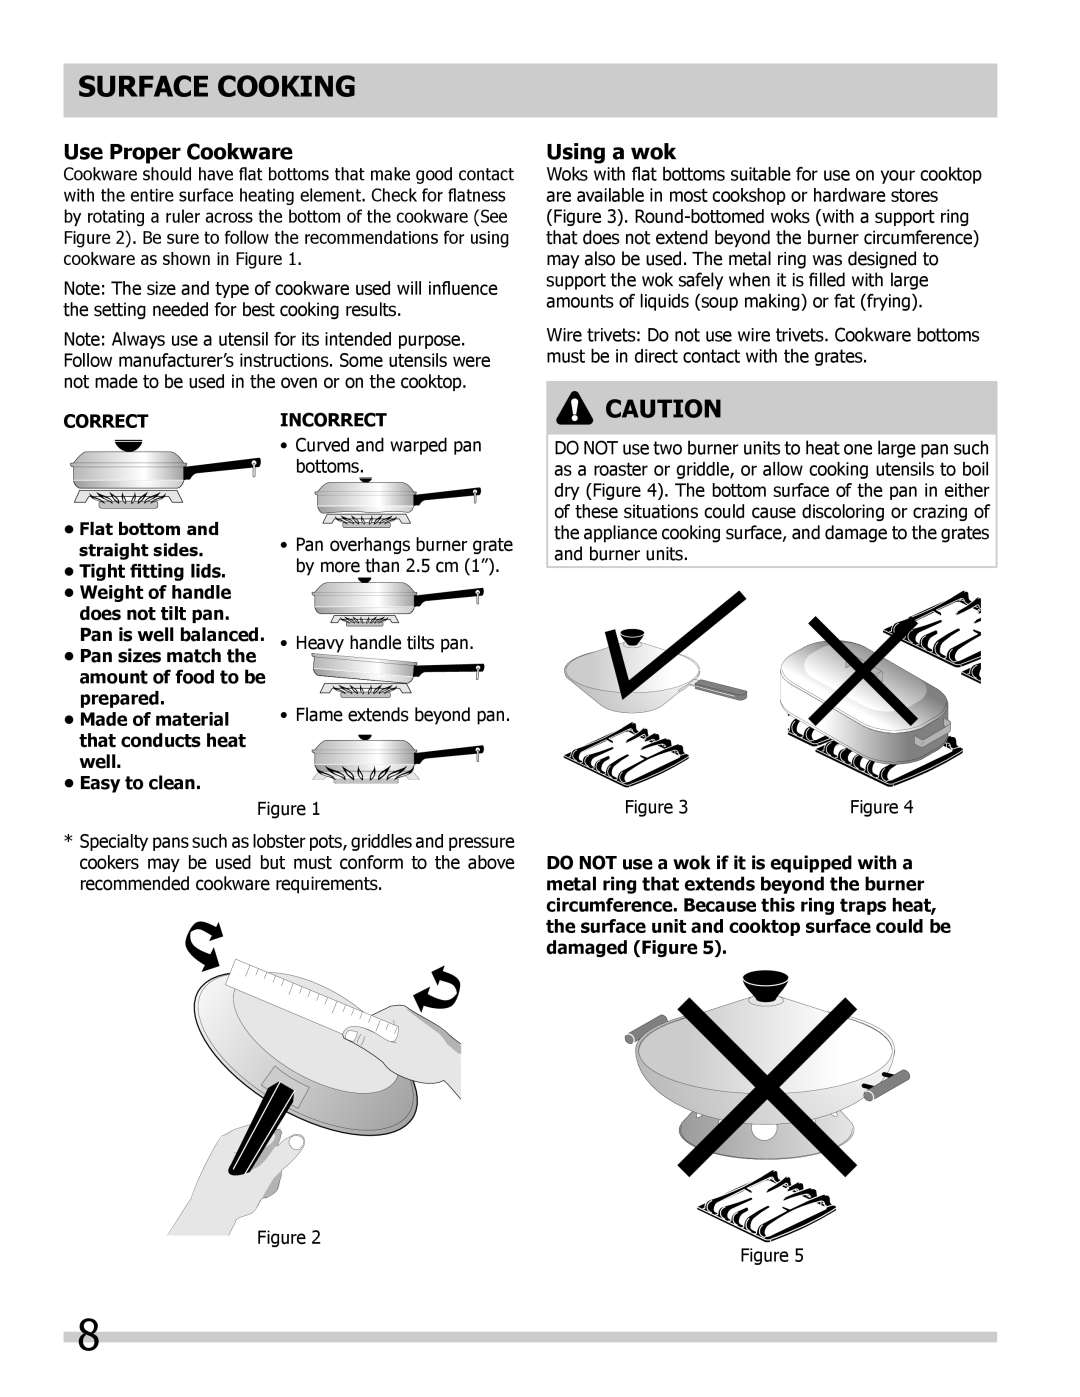 Frigidaire FPDF4085KF important safety instructions surface cooking, Use Proper Cookware, Using a wok 